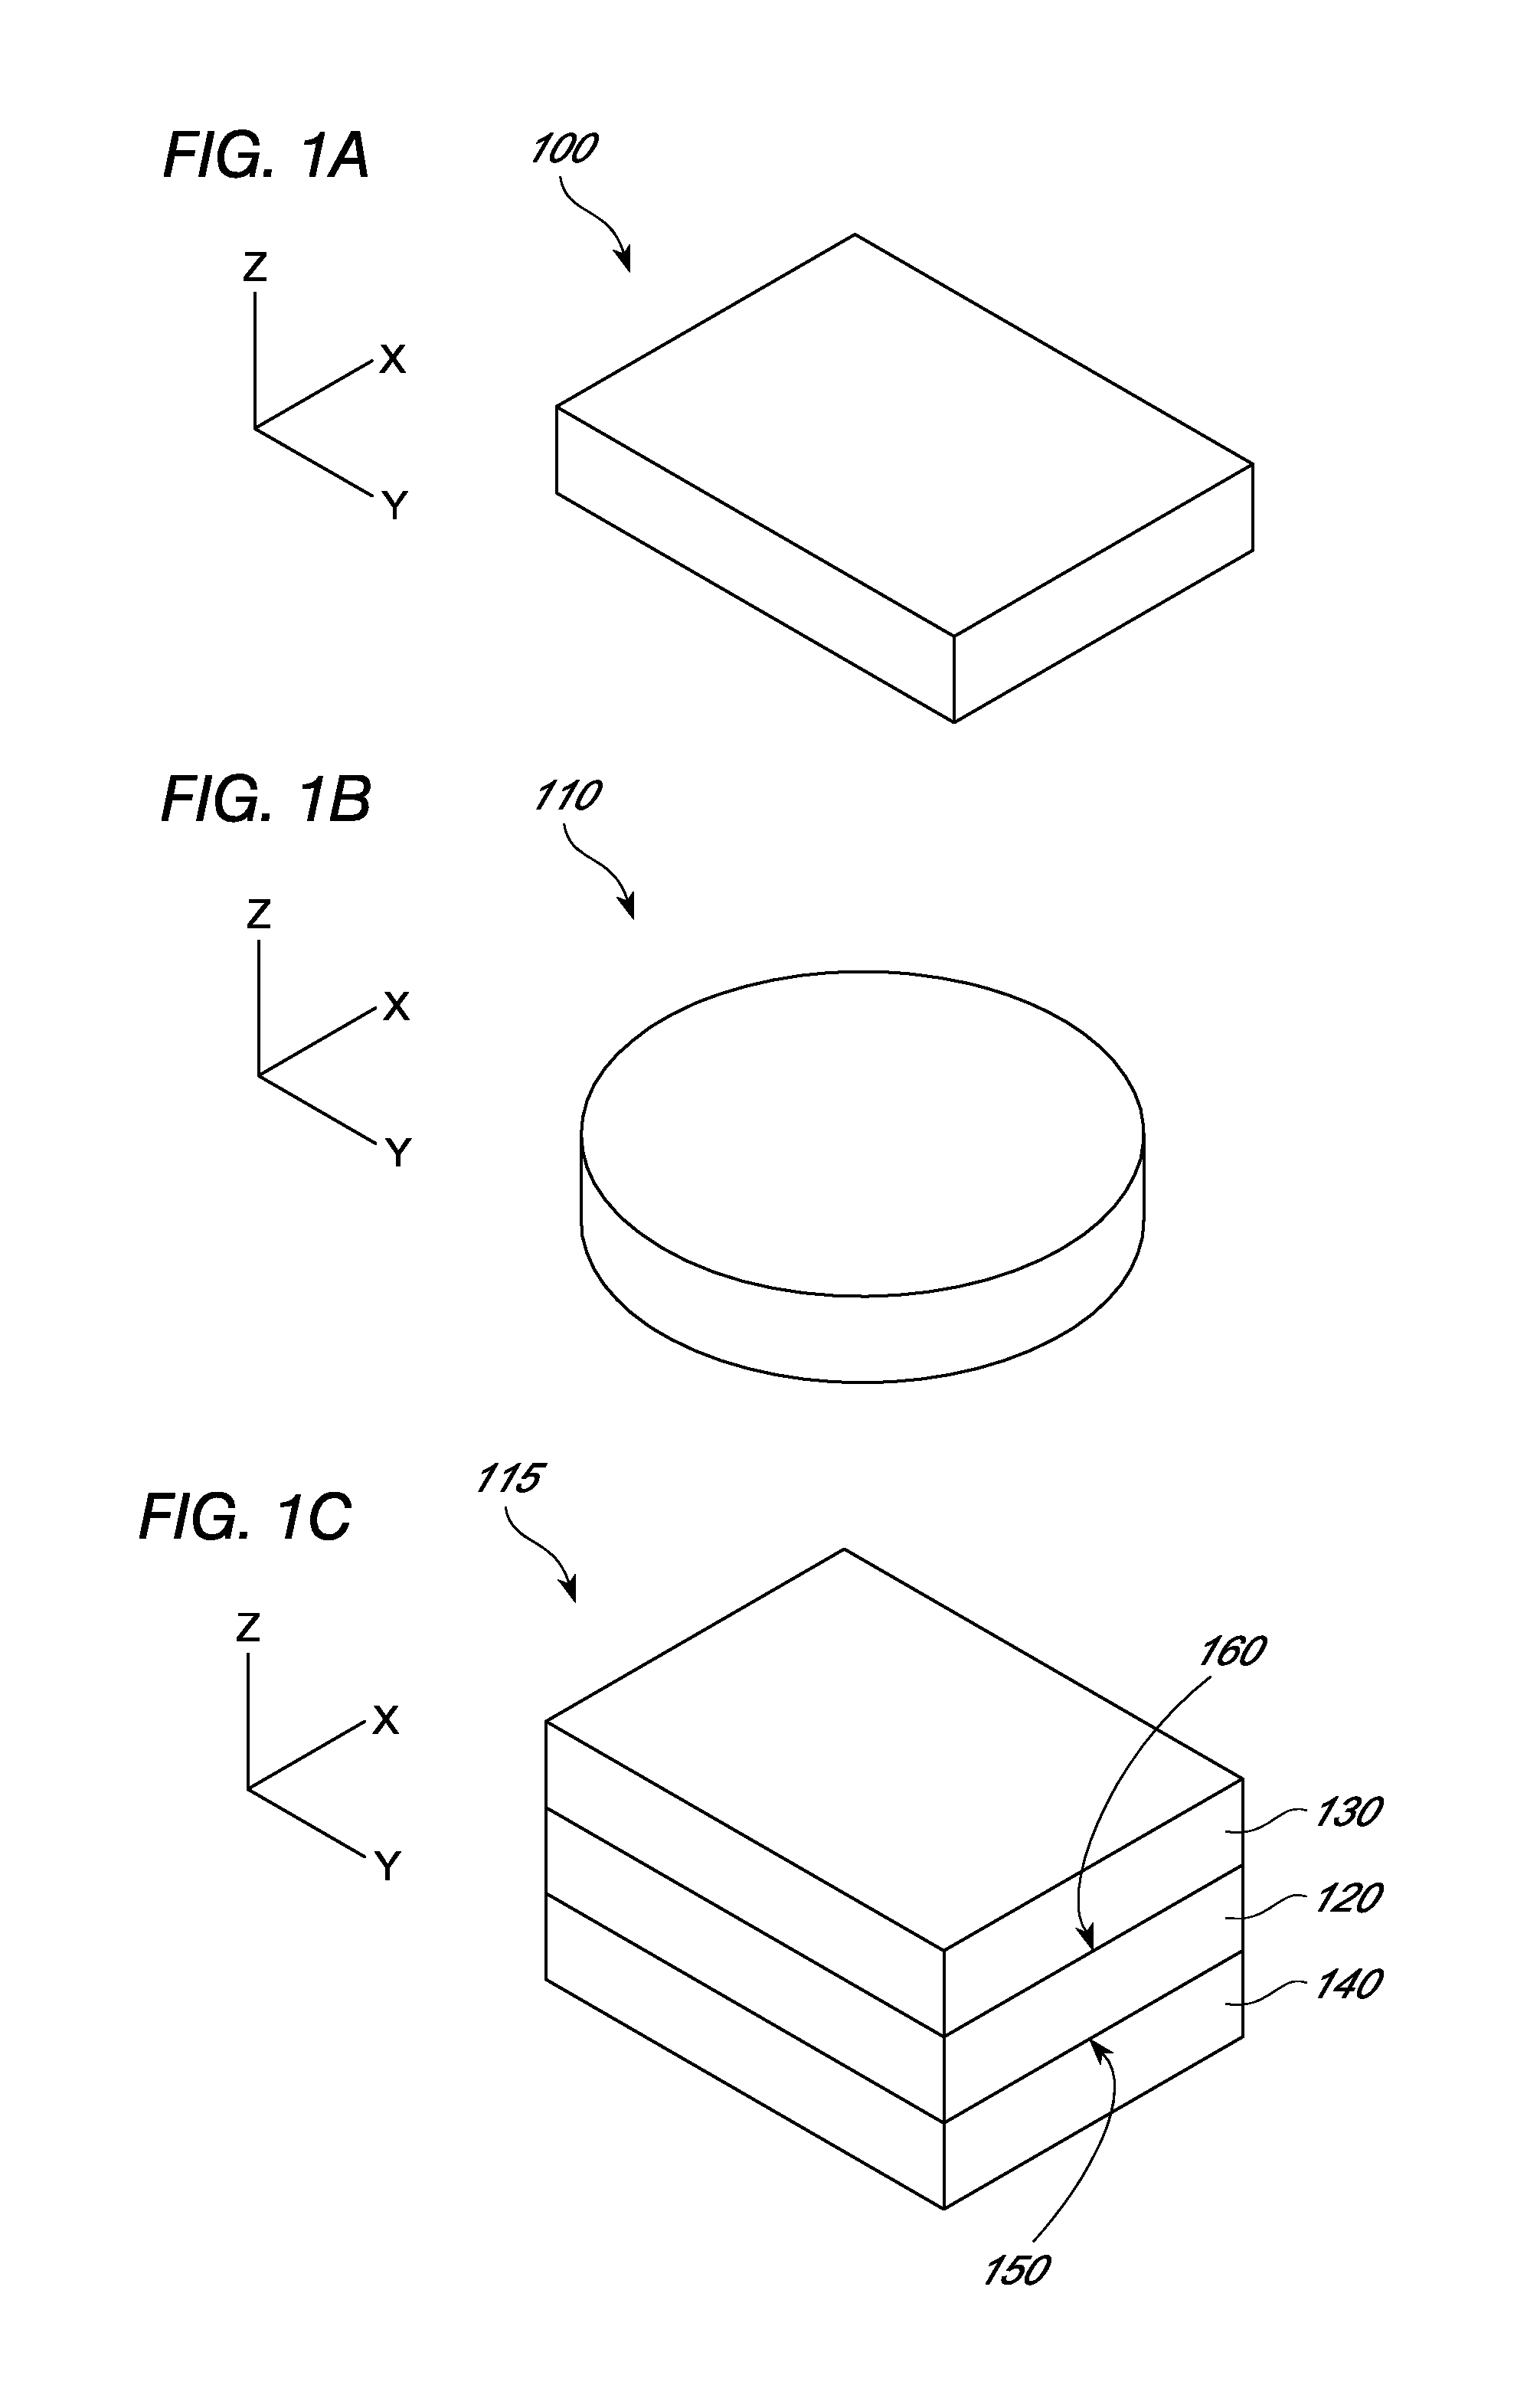 Emissive ceramic materials having a dopant concentration gradient and methods of making and using the same